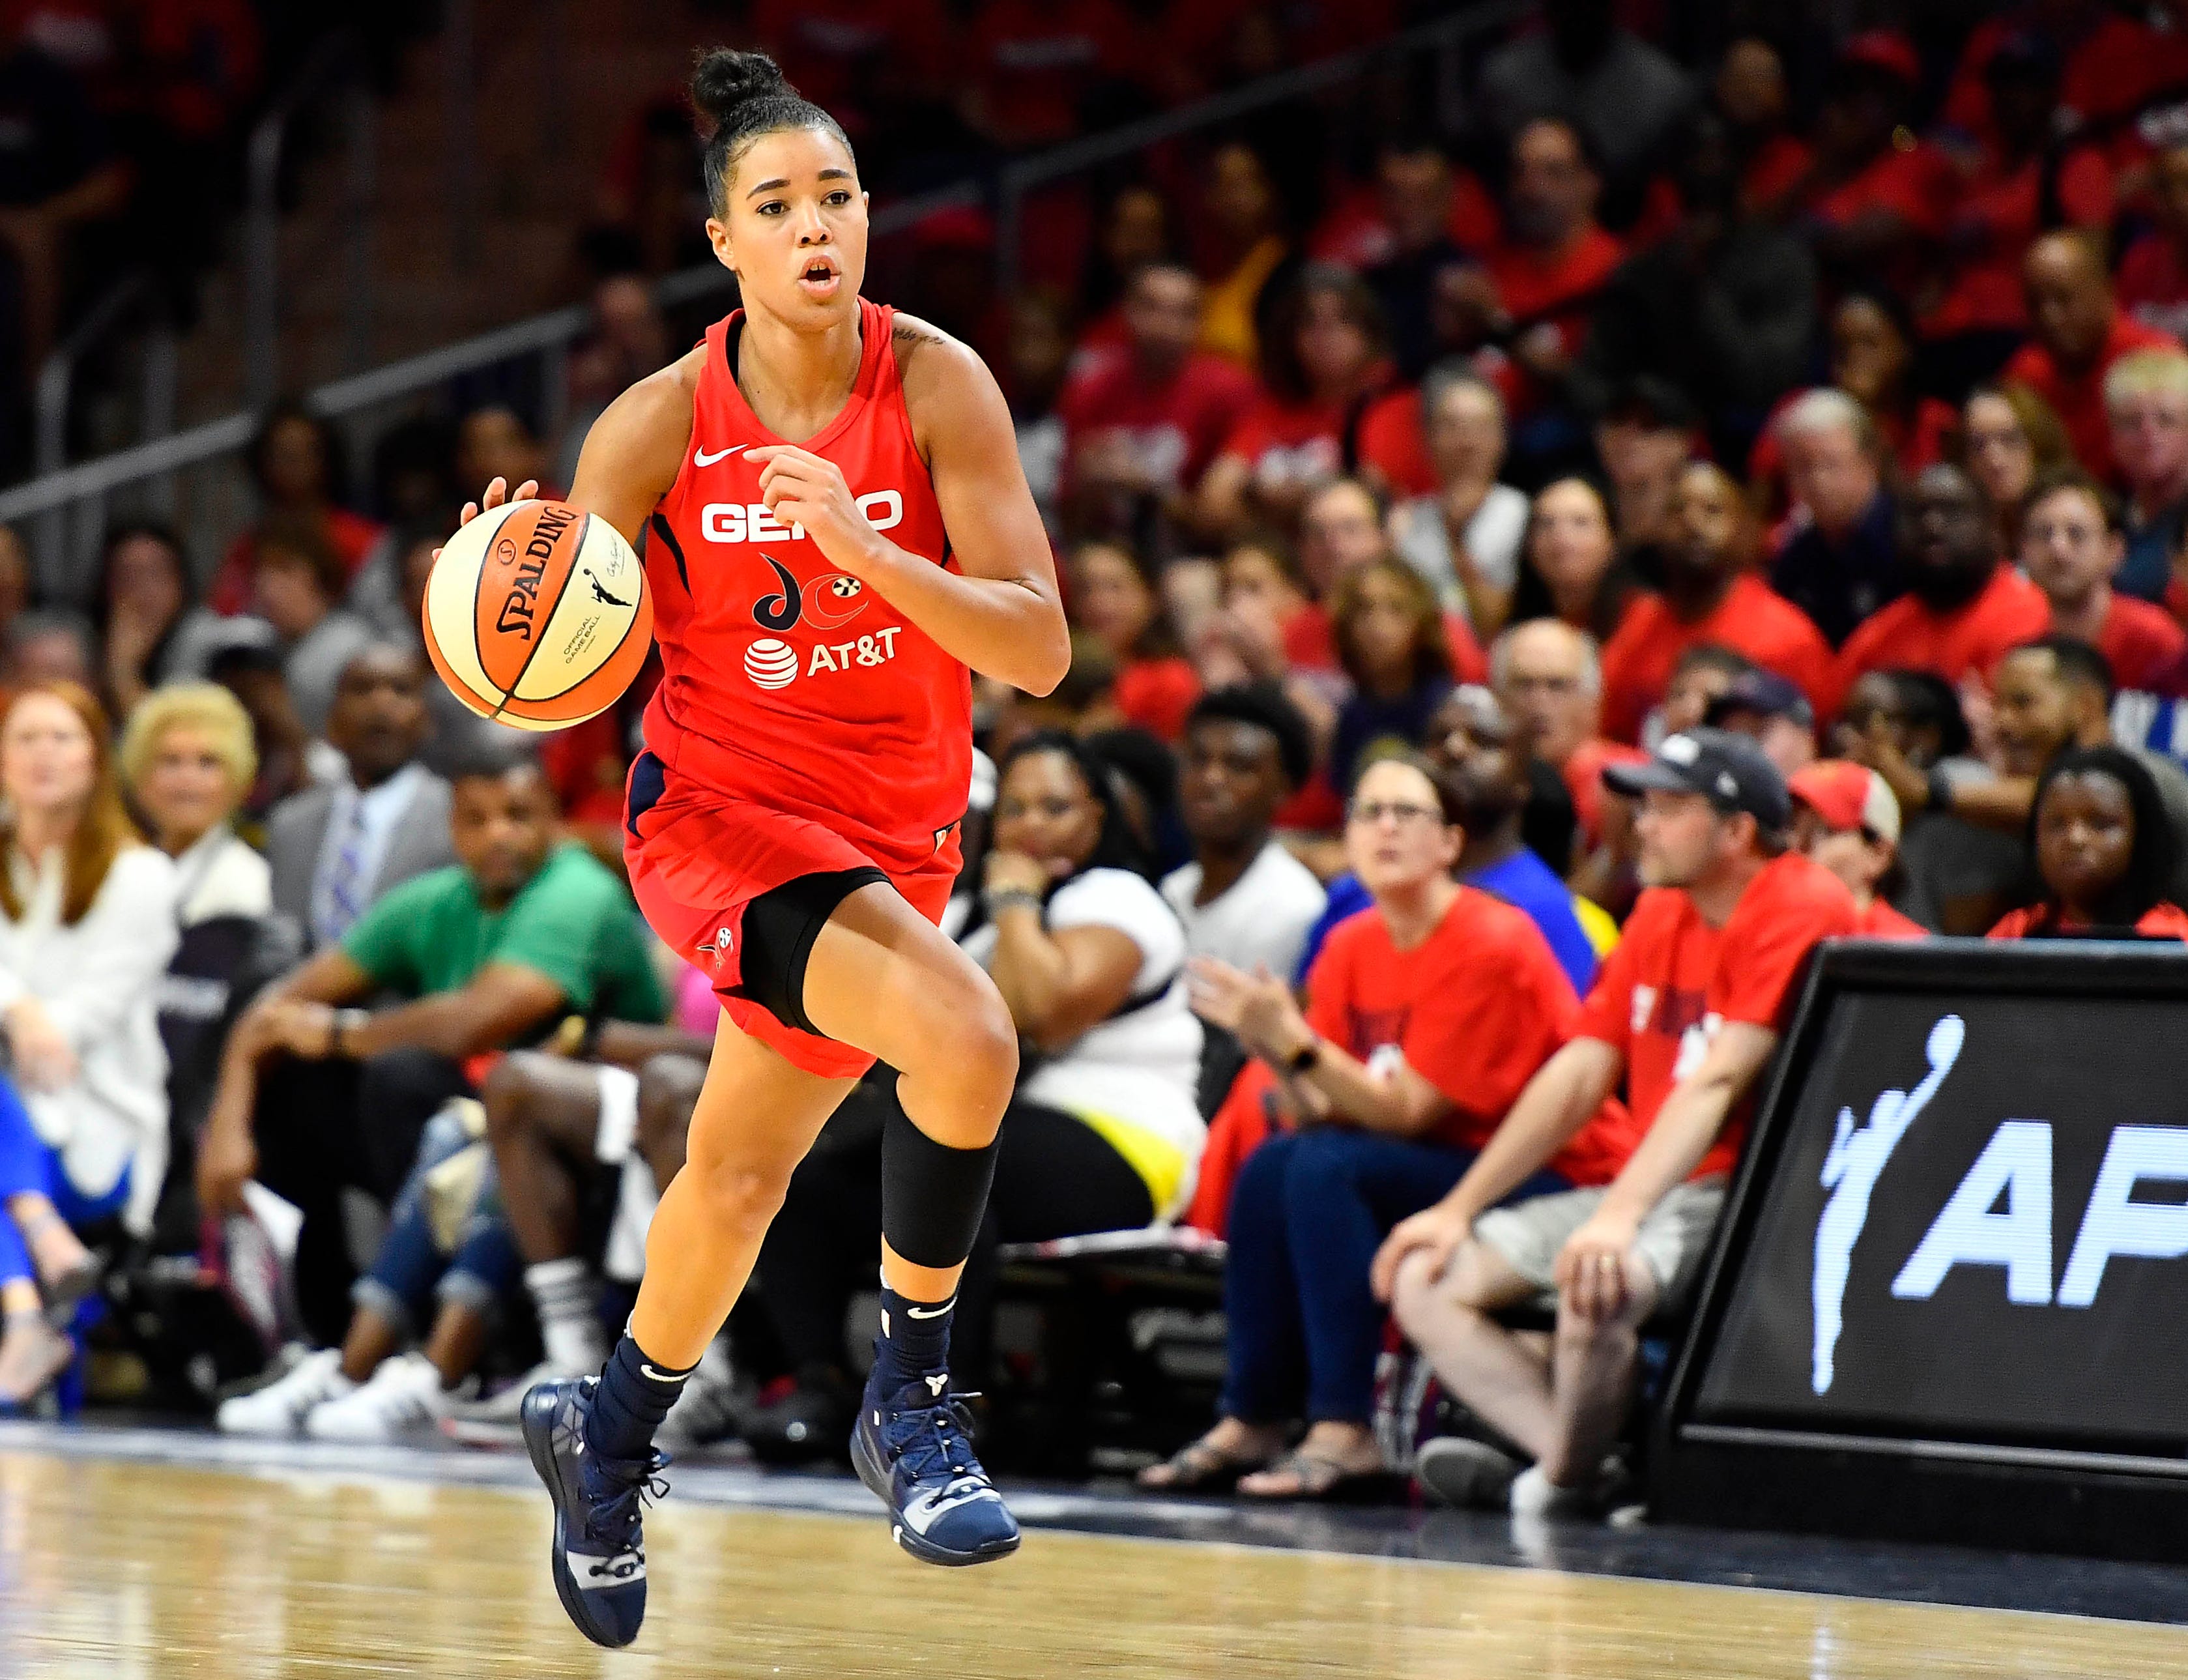 Washington Mystics guard Natasha Cloud (9) advances the ball against the Connecticut Sun during the 2019 WNBA Finals. Cloud recently shared her concerns about women’s rights being rolled back across the country.